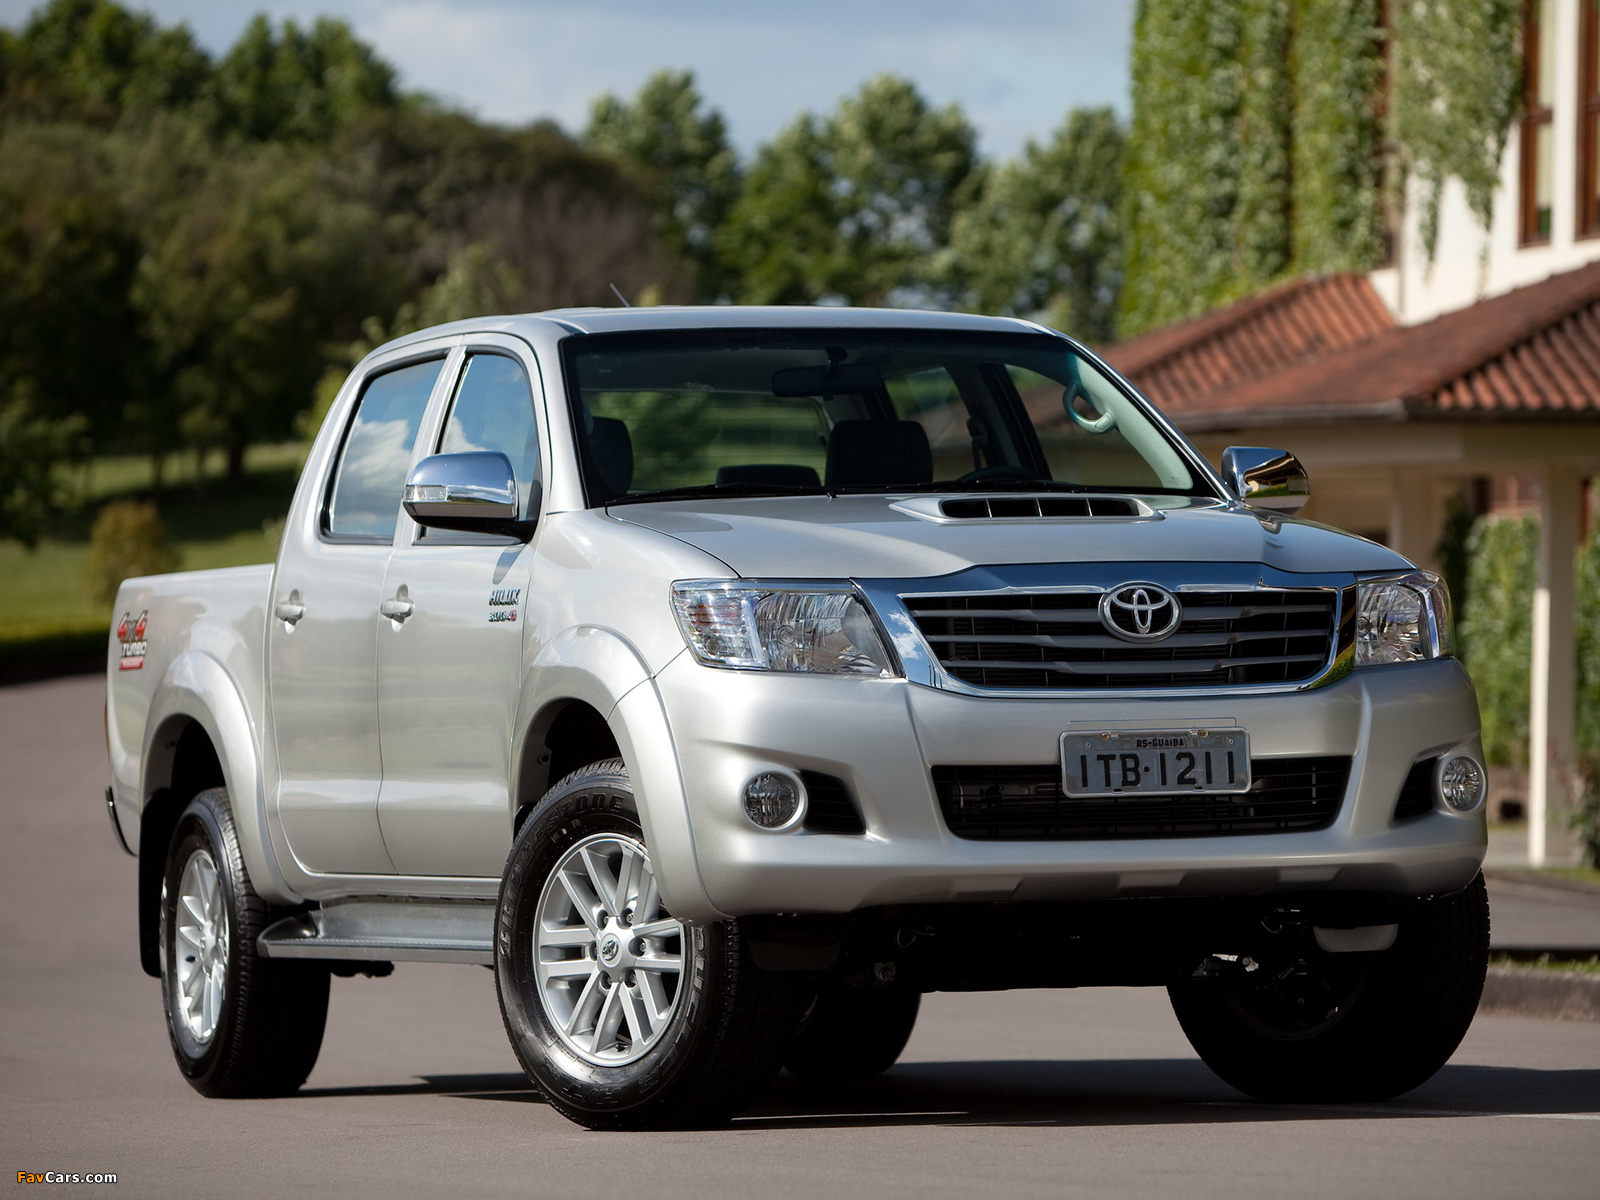 Toyota Hilux SRV Cabine Dupla 4x4 2012 pictures (1600 x 1200)